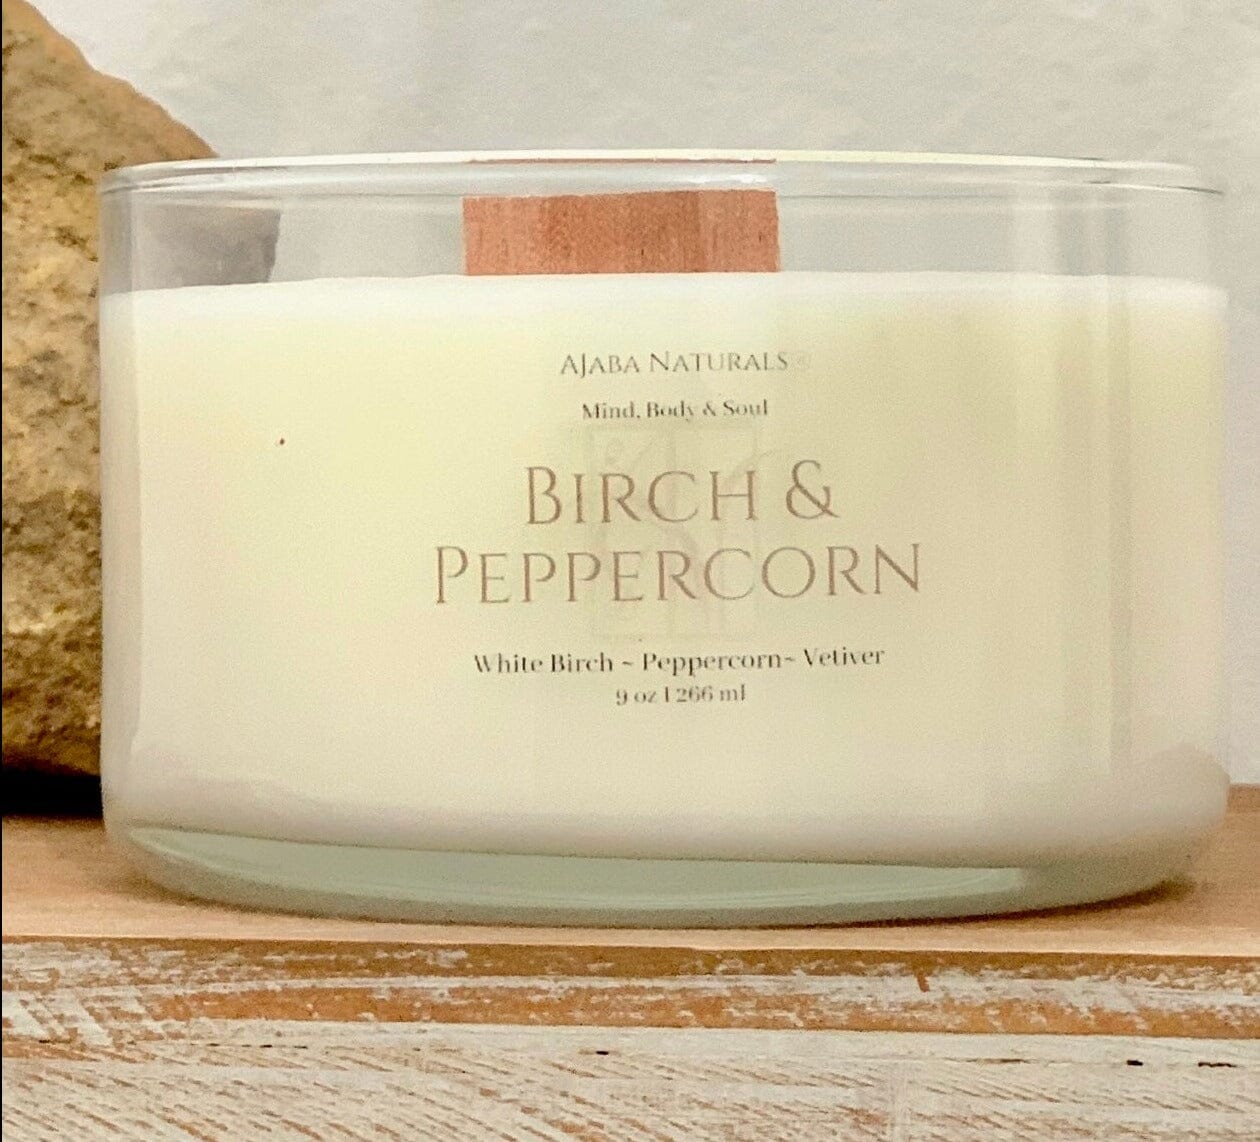 Birch & Peppercorn Artisan Soy Wax Candle Candle AJABA NATURALS® 